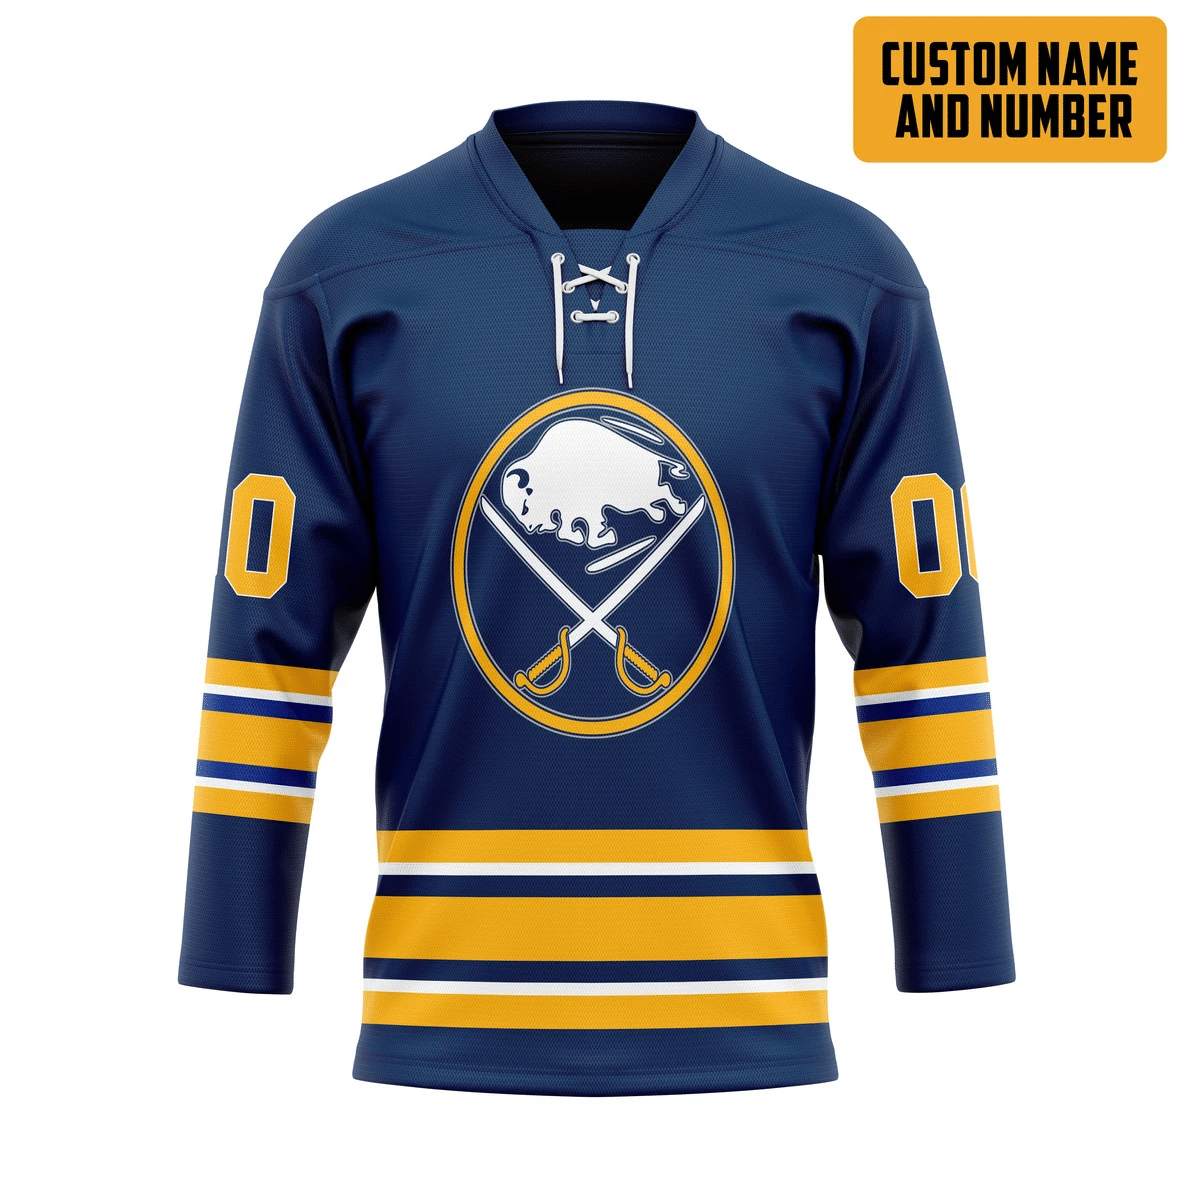 The hockey jersey is a must for every player in a team. 9